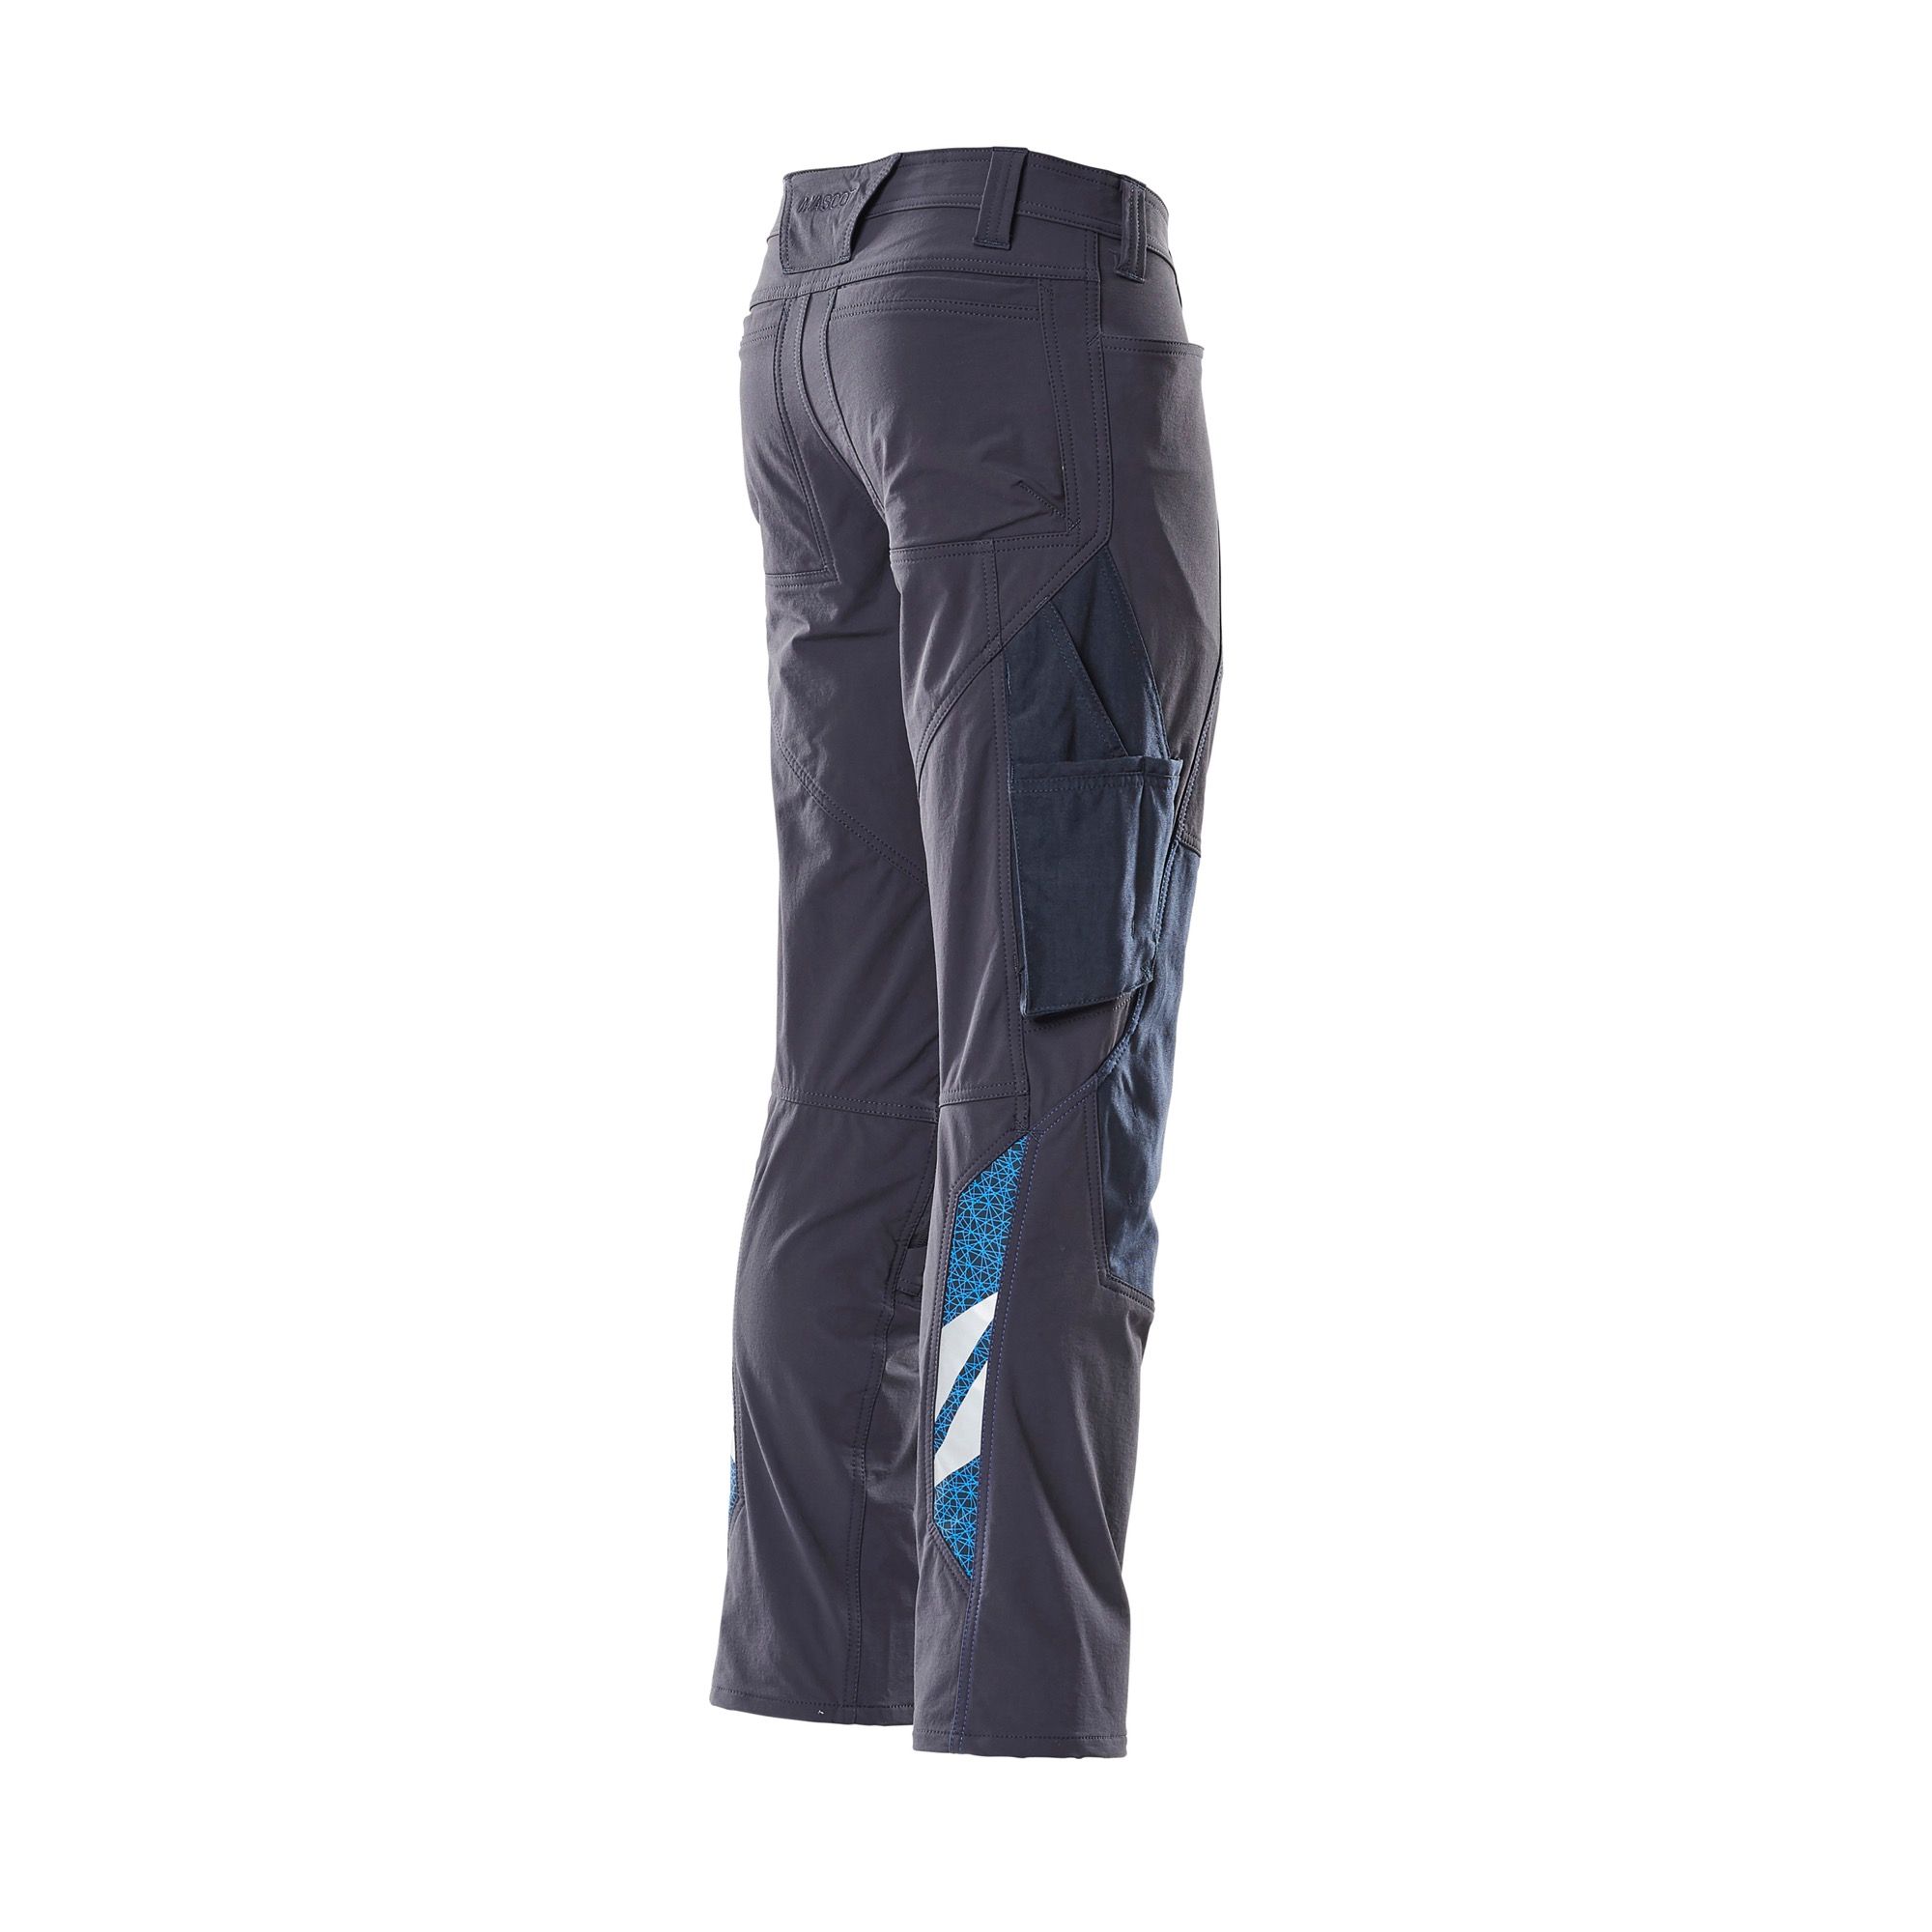 Mascot Accelerate 18279 Pants With Thigh Pockets Black